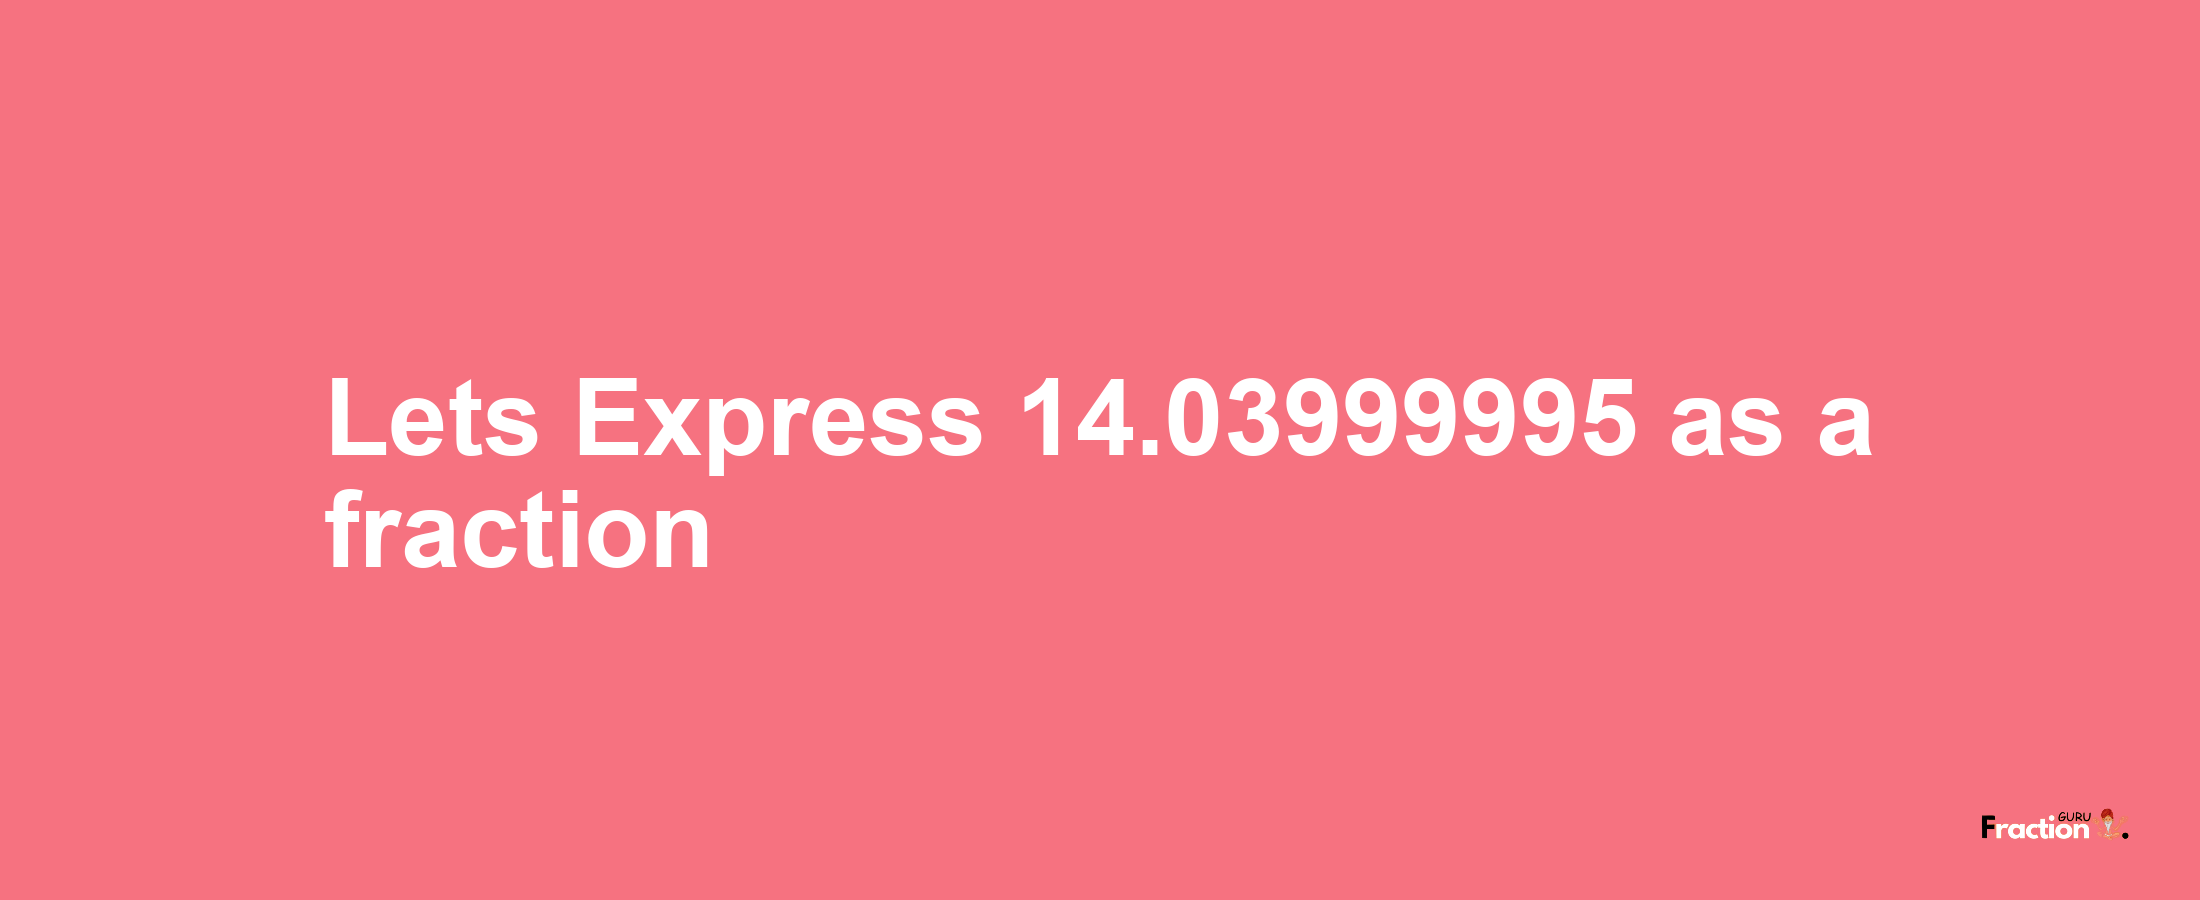 Lets Express 14.03999995 as afraction